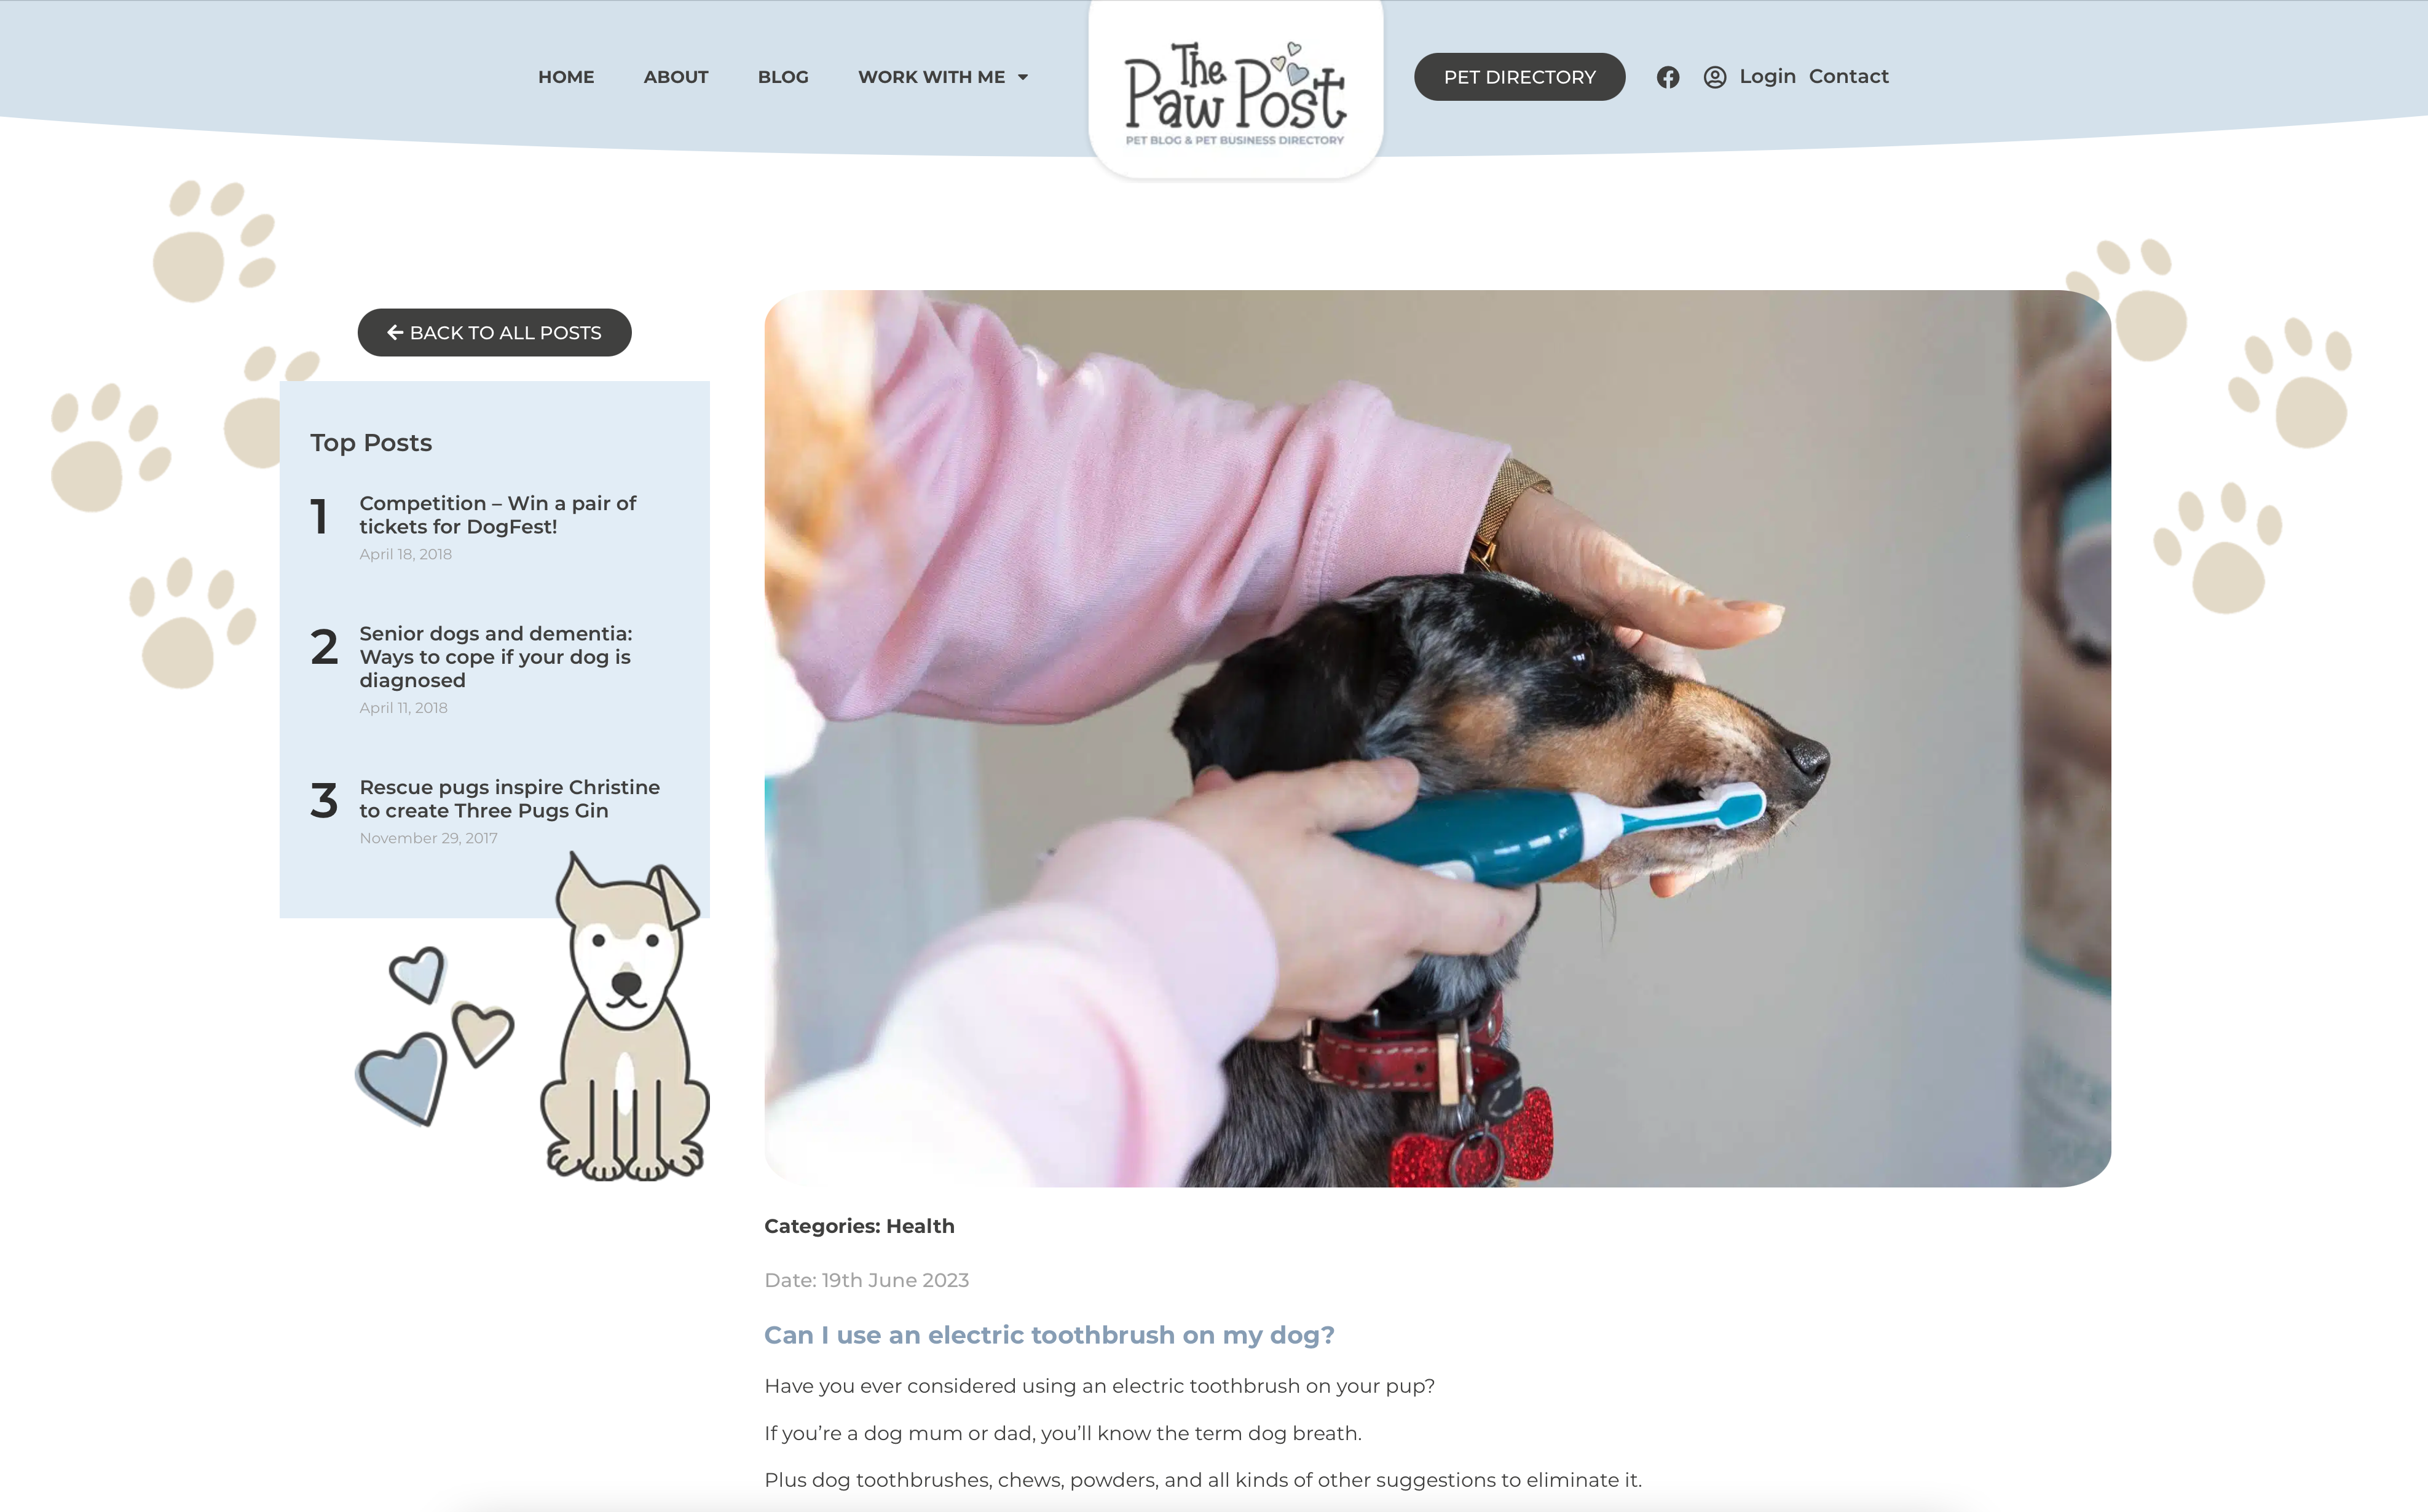 The Dog Tooth Fairy® @ The Paw Post